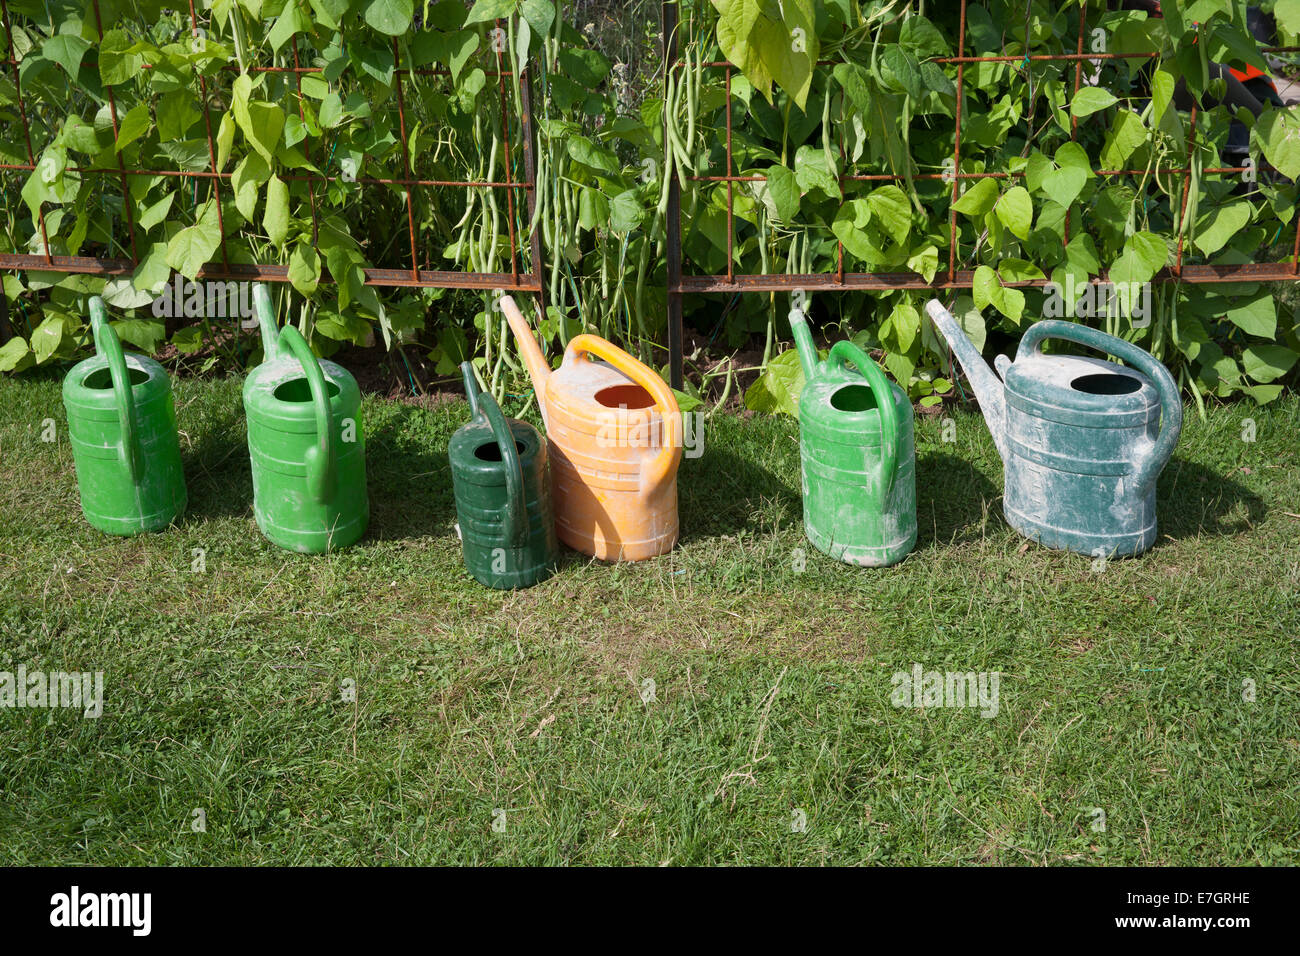 Row of watering cans next to french beans at Tatton Park 2014 Cheshire RHS flower show - drought Stock Photo